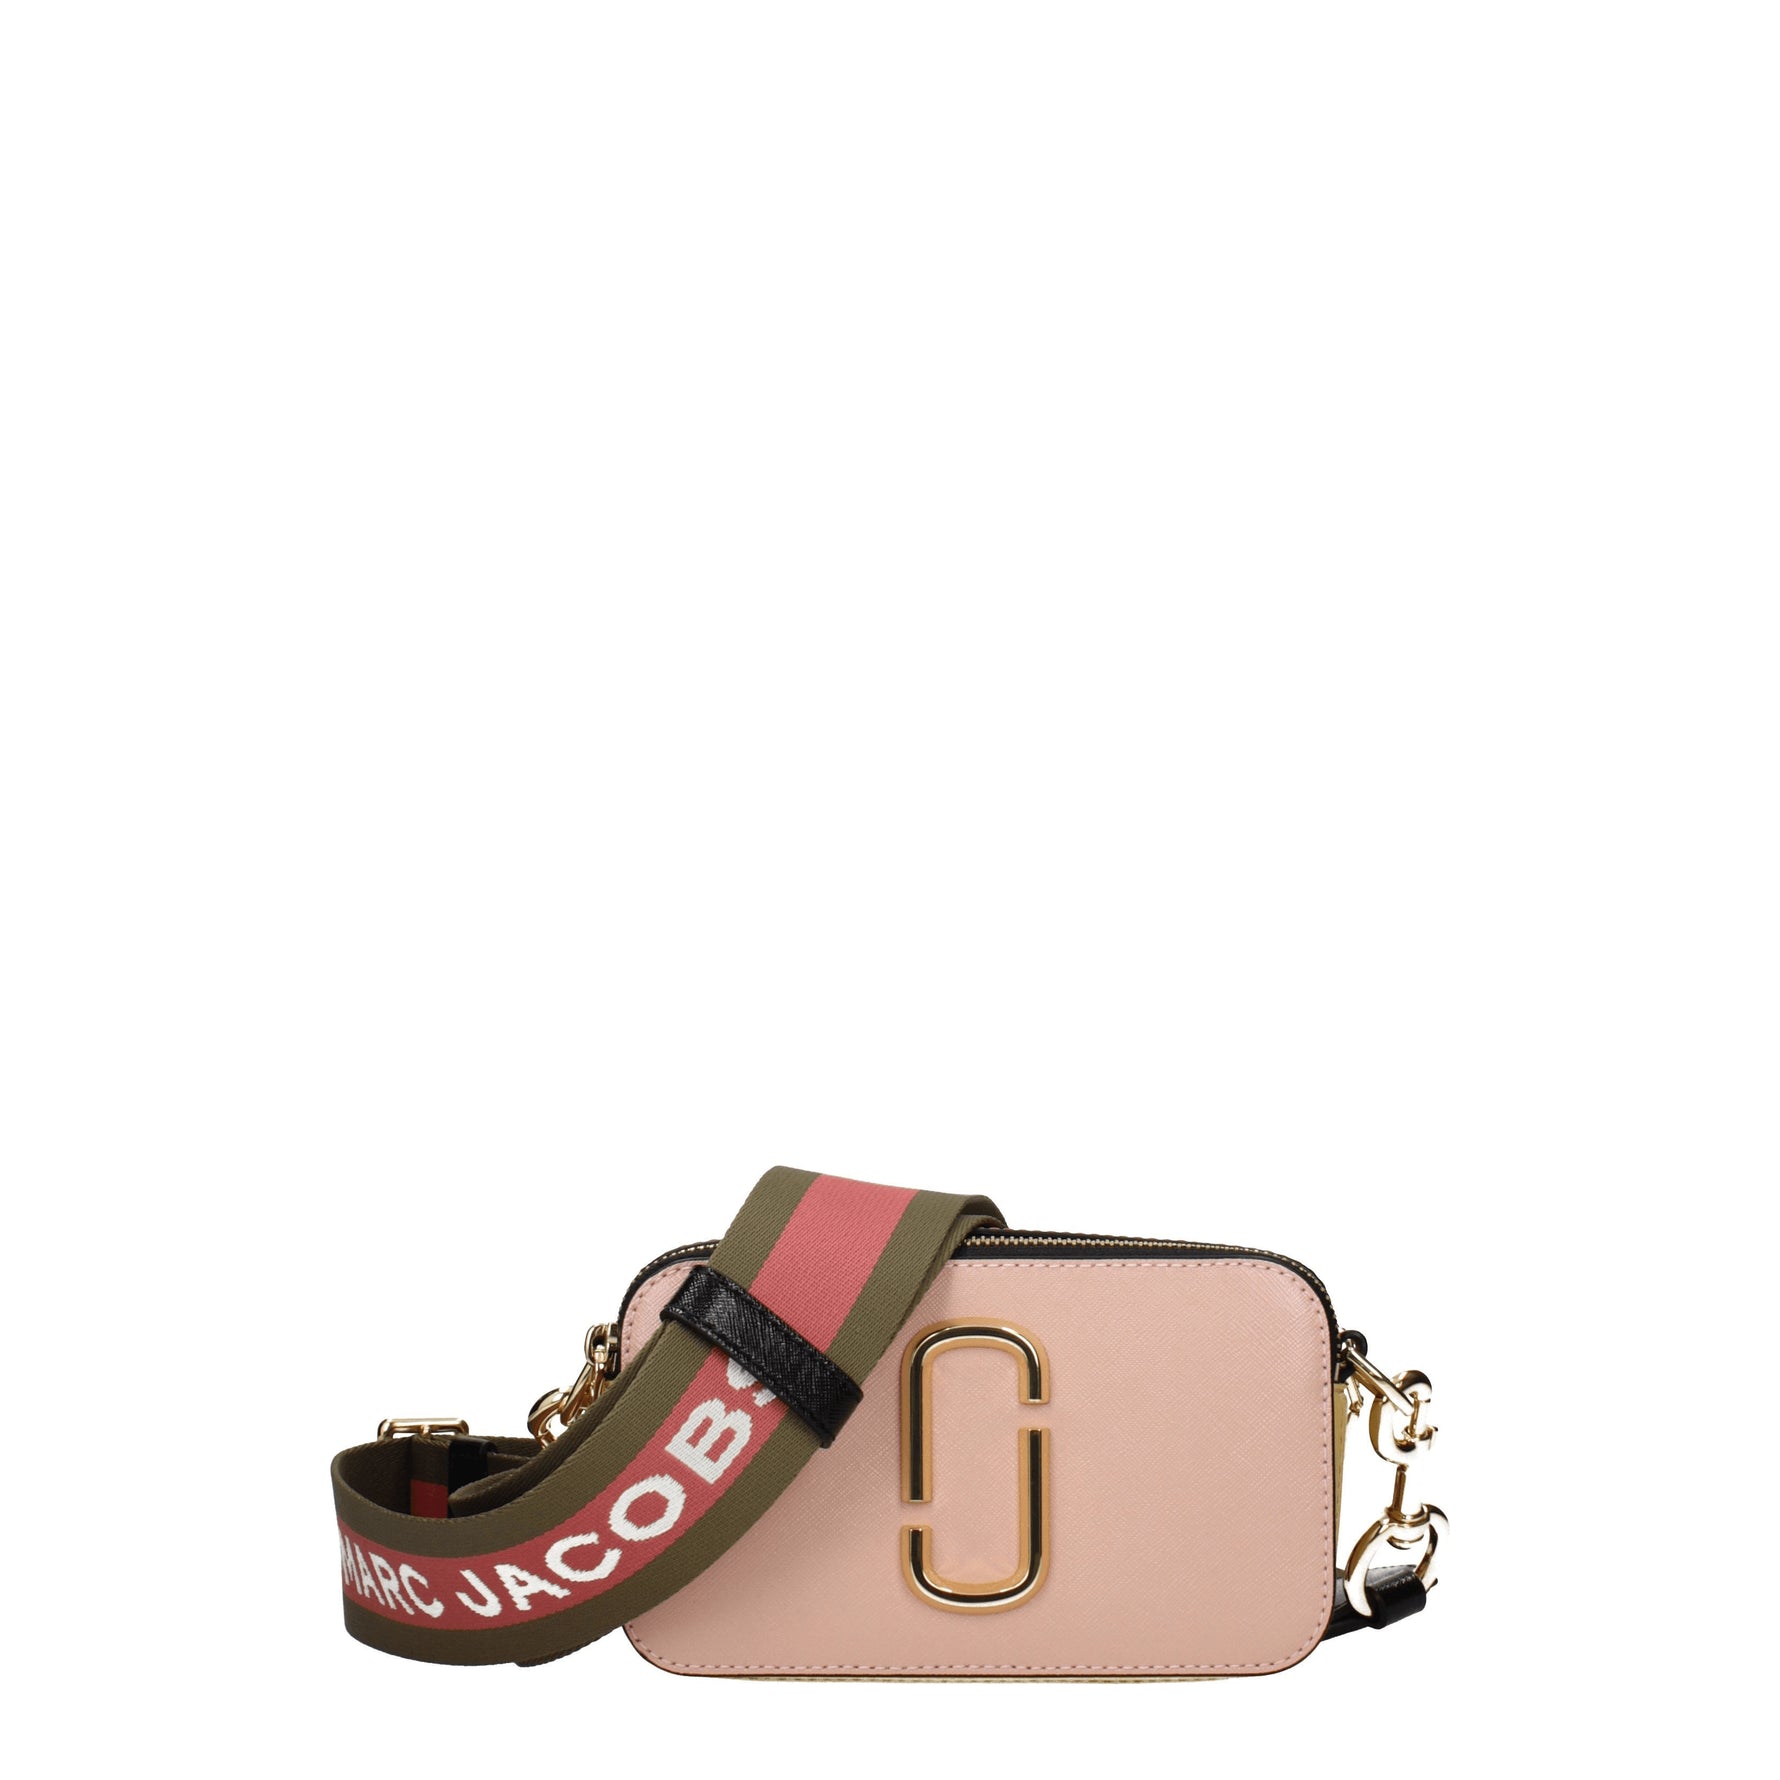 Marc Jacobs Borse a Tracolla Donna Pelle Rosa Rose